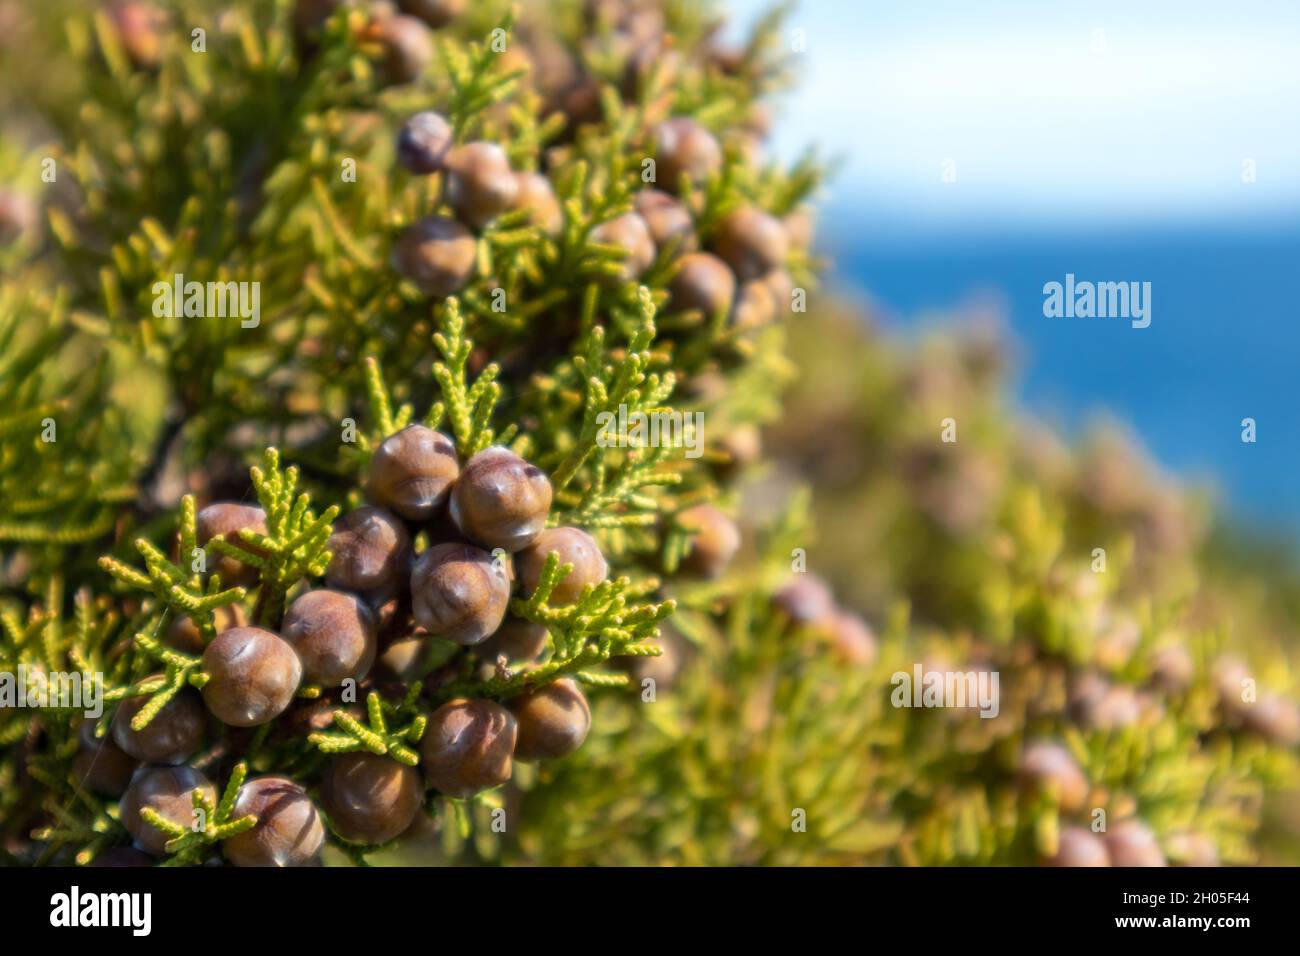 Green Juniperus excelsa with dry berries, the Greek juniper evergreen tree branch fur vibrant close-up with blurred sunny sea background. Mediterranea Stock Photo